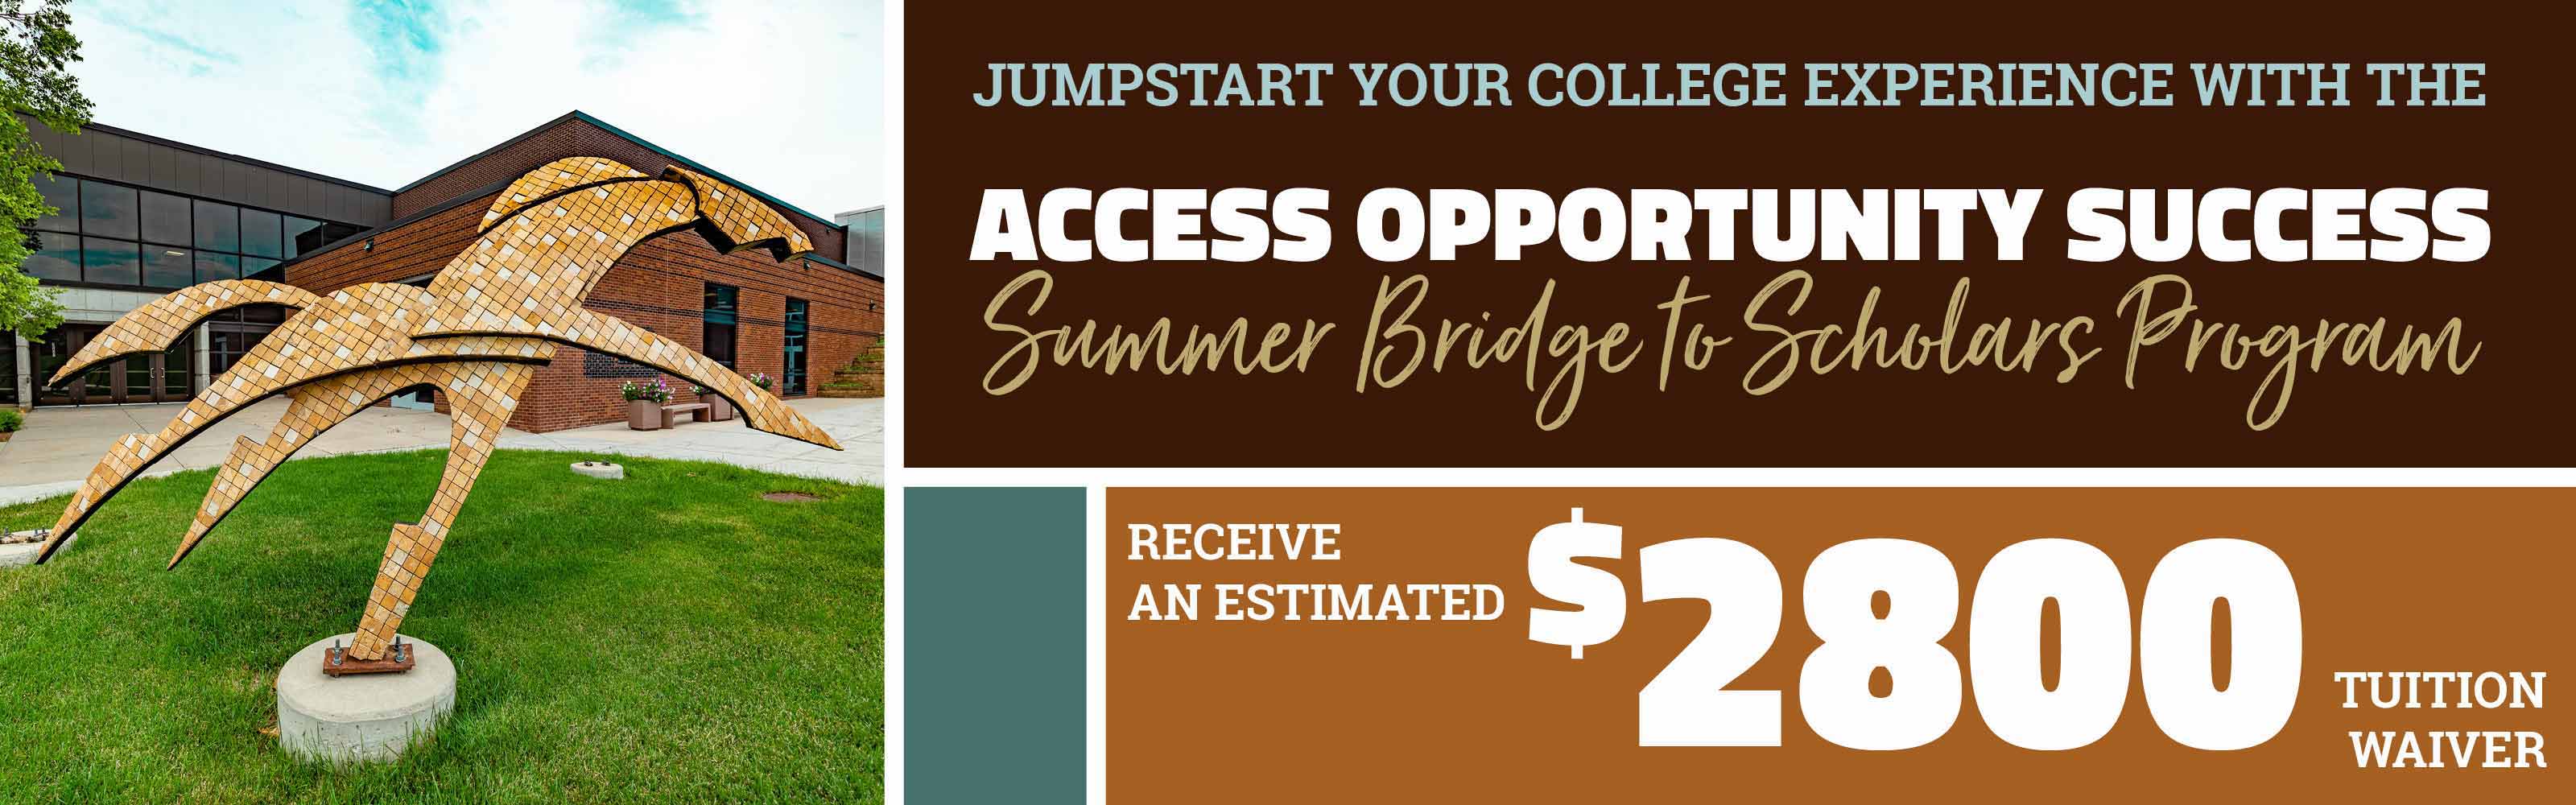 Jumpstart your college experience with the Access Opportunity Success Summer Bridge to Scholars Program - Receive an estimated $2,800 tuition waiver